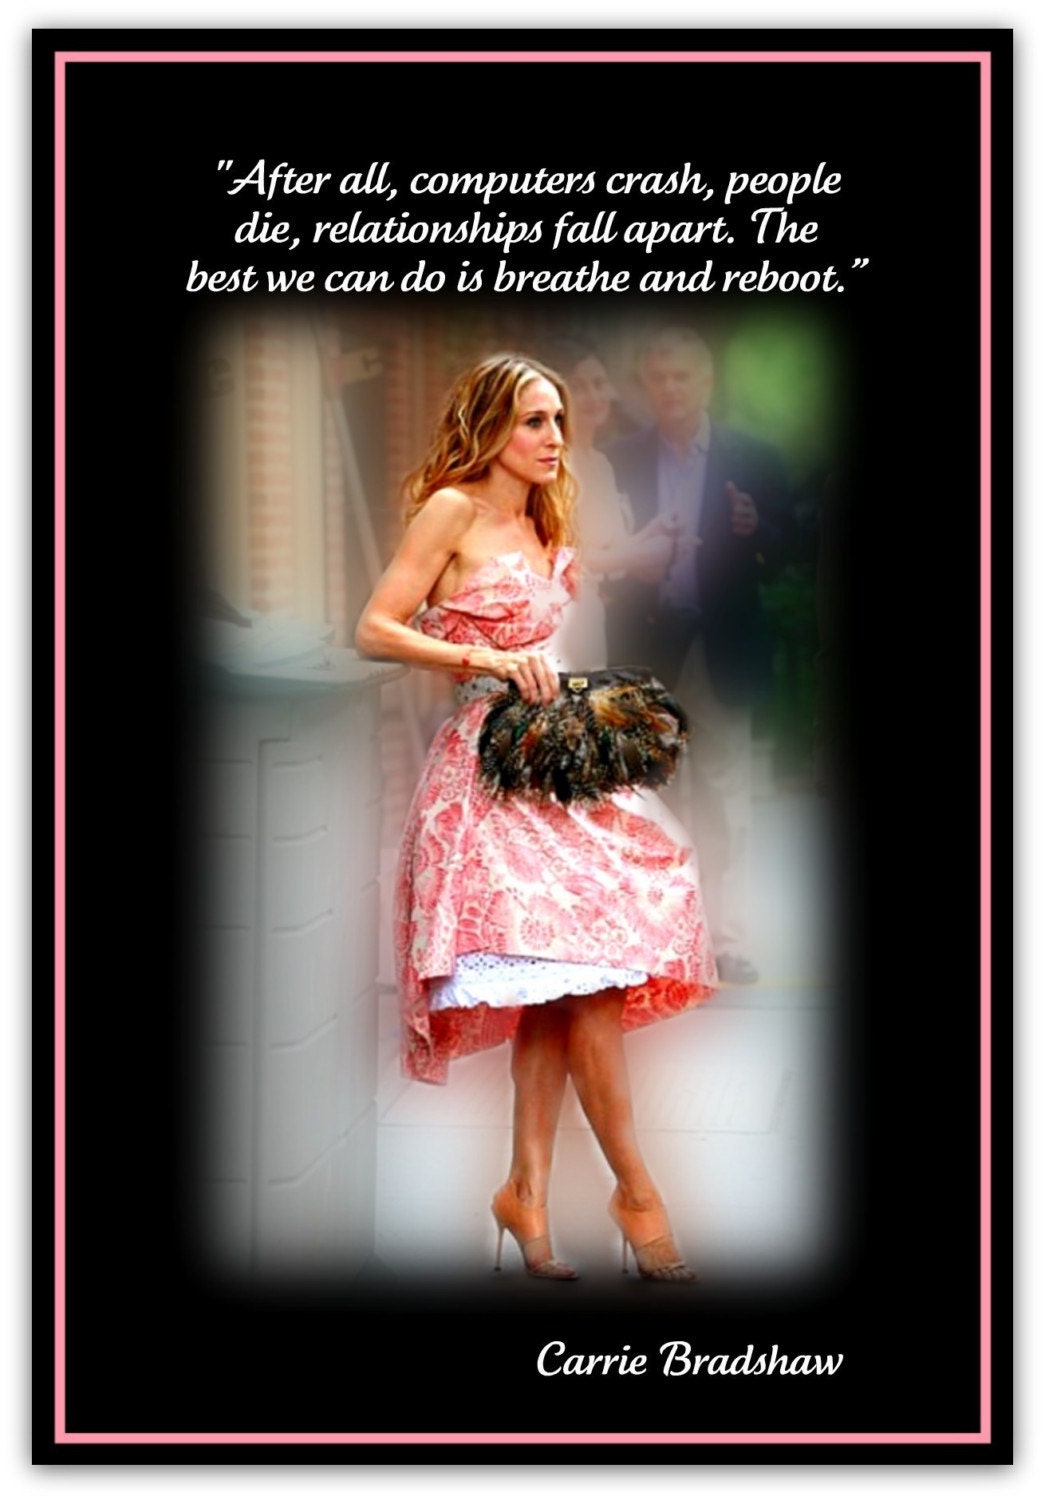 Quotes From Carrie Bradshaw After All Computers Crash People